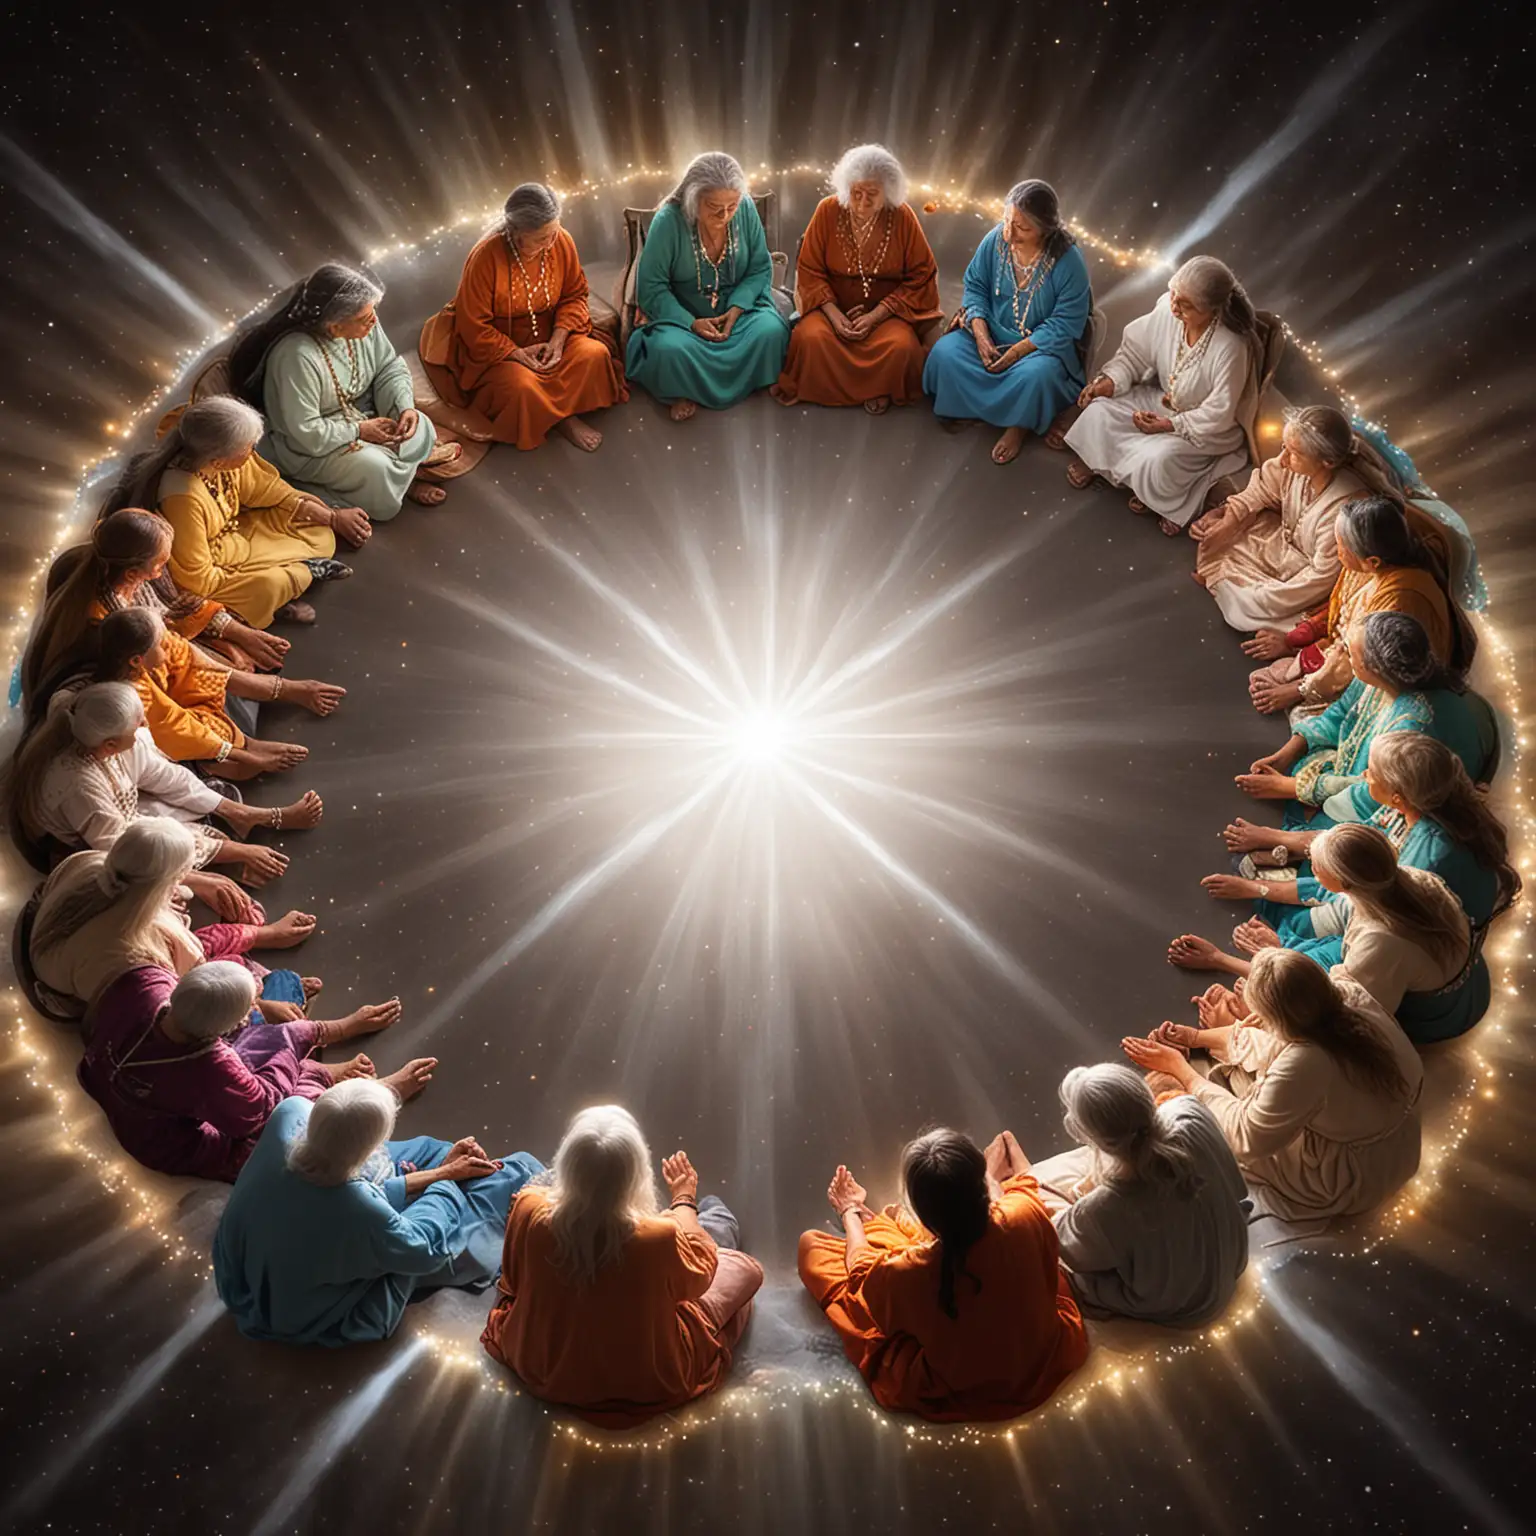 Council of Angelic Medicine Women Grandmothers in Celestial Circle